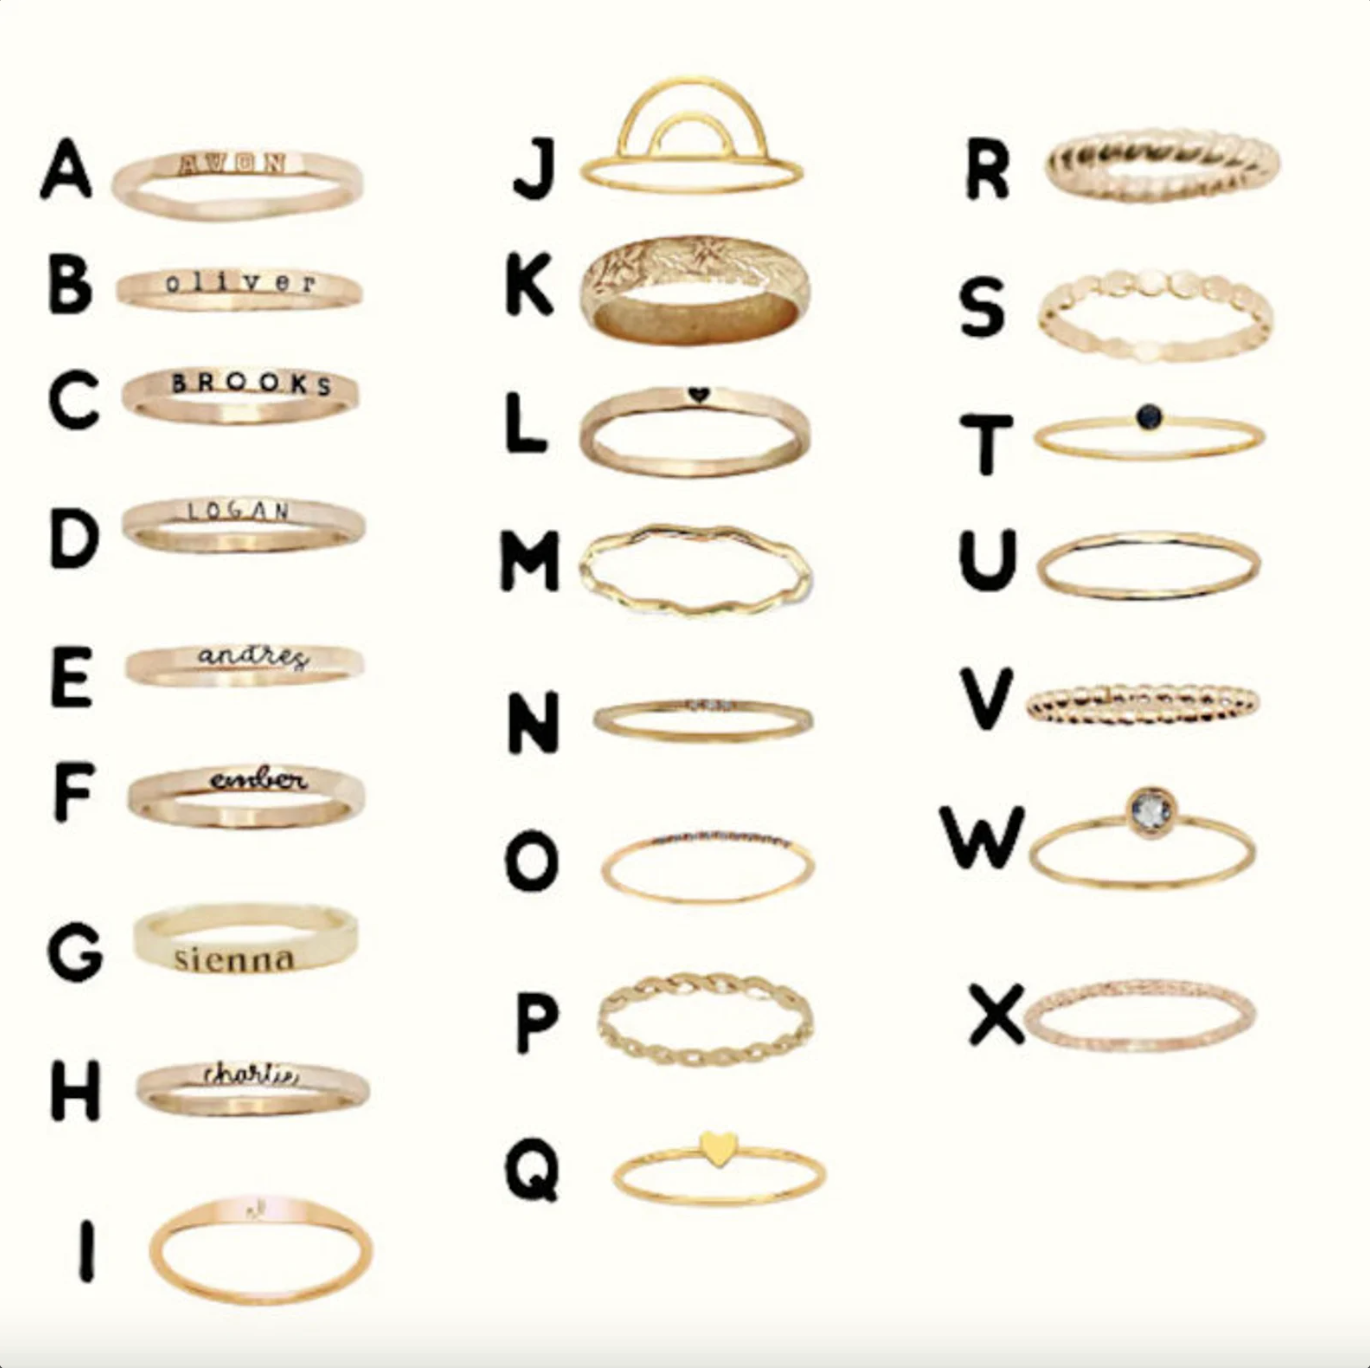 Design your own name ring set - Going Golden